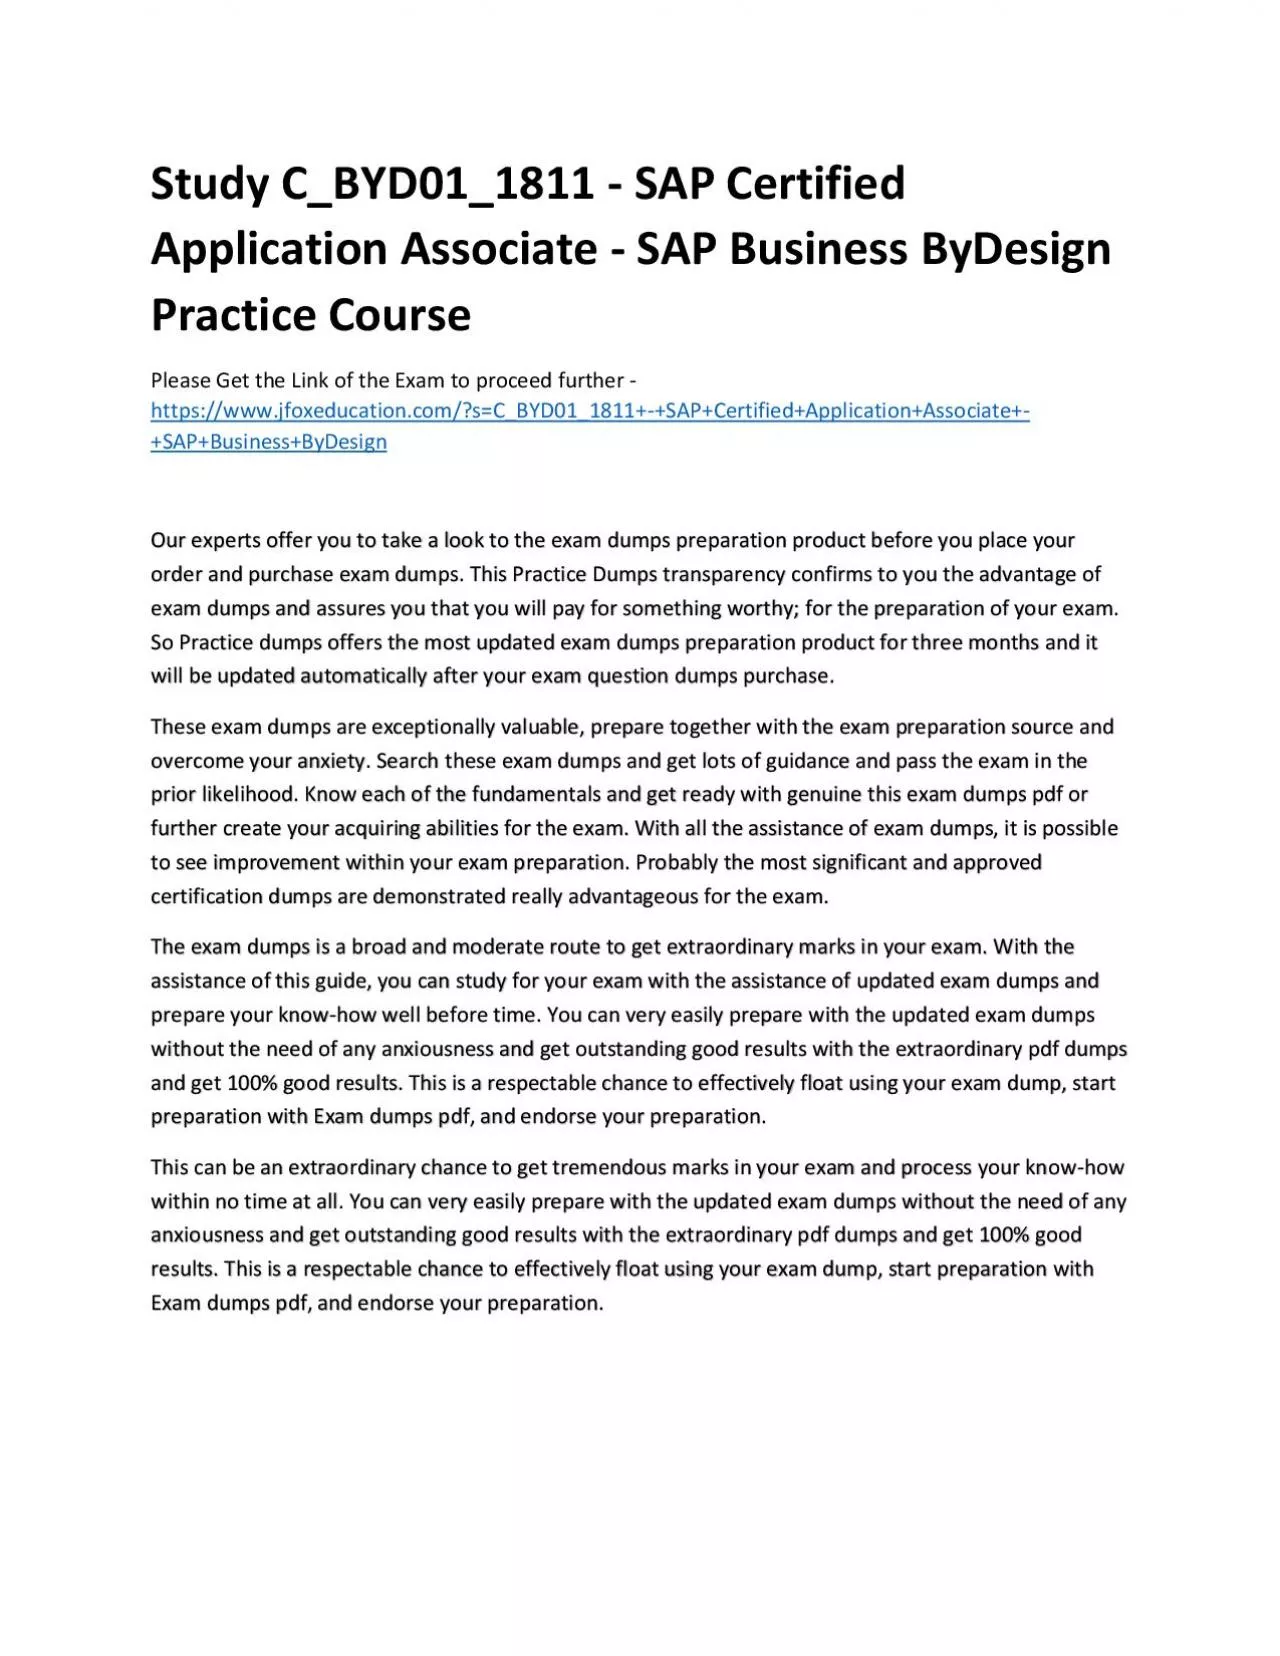 Study C_BYD01_1811 - SAP Certified Application Associate - SAP Business ByDesign Practice